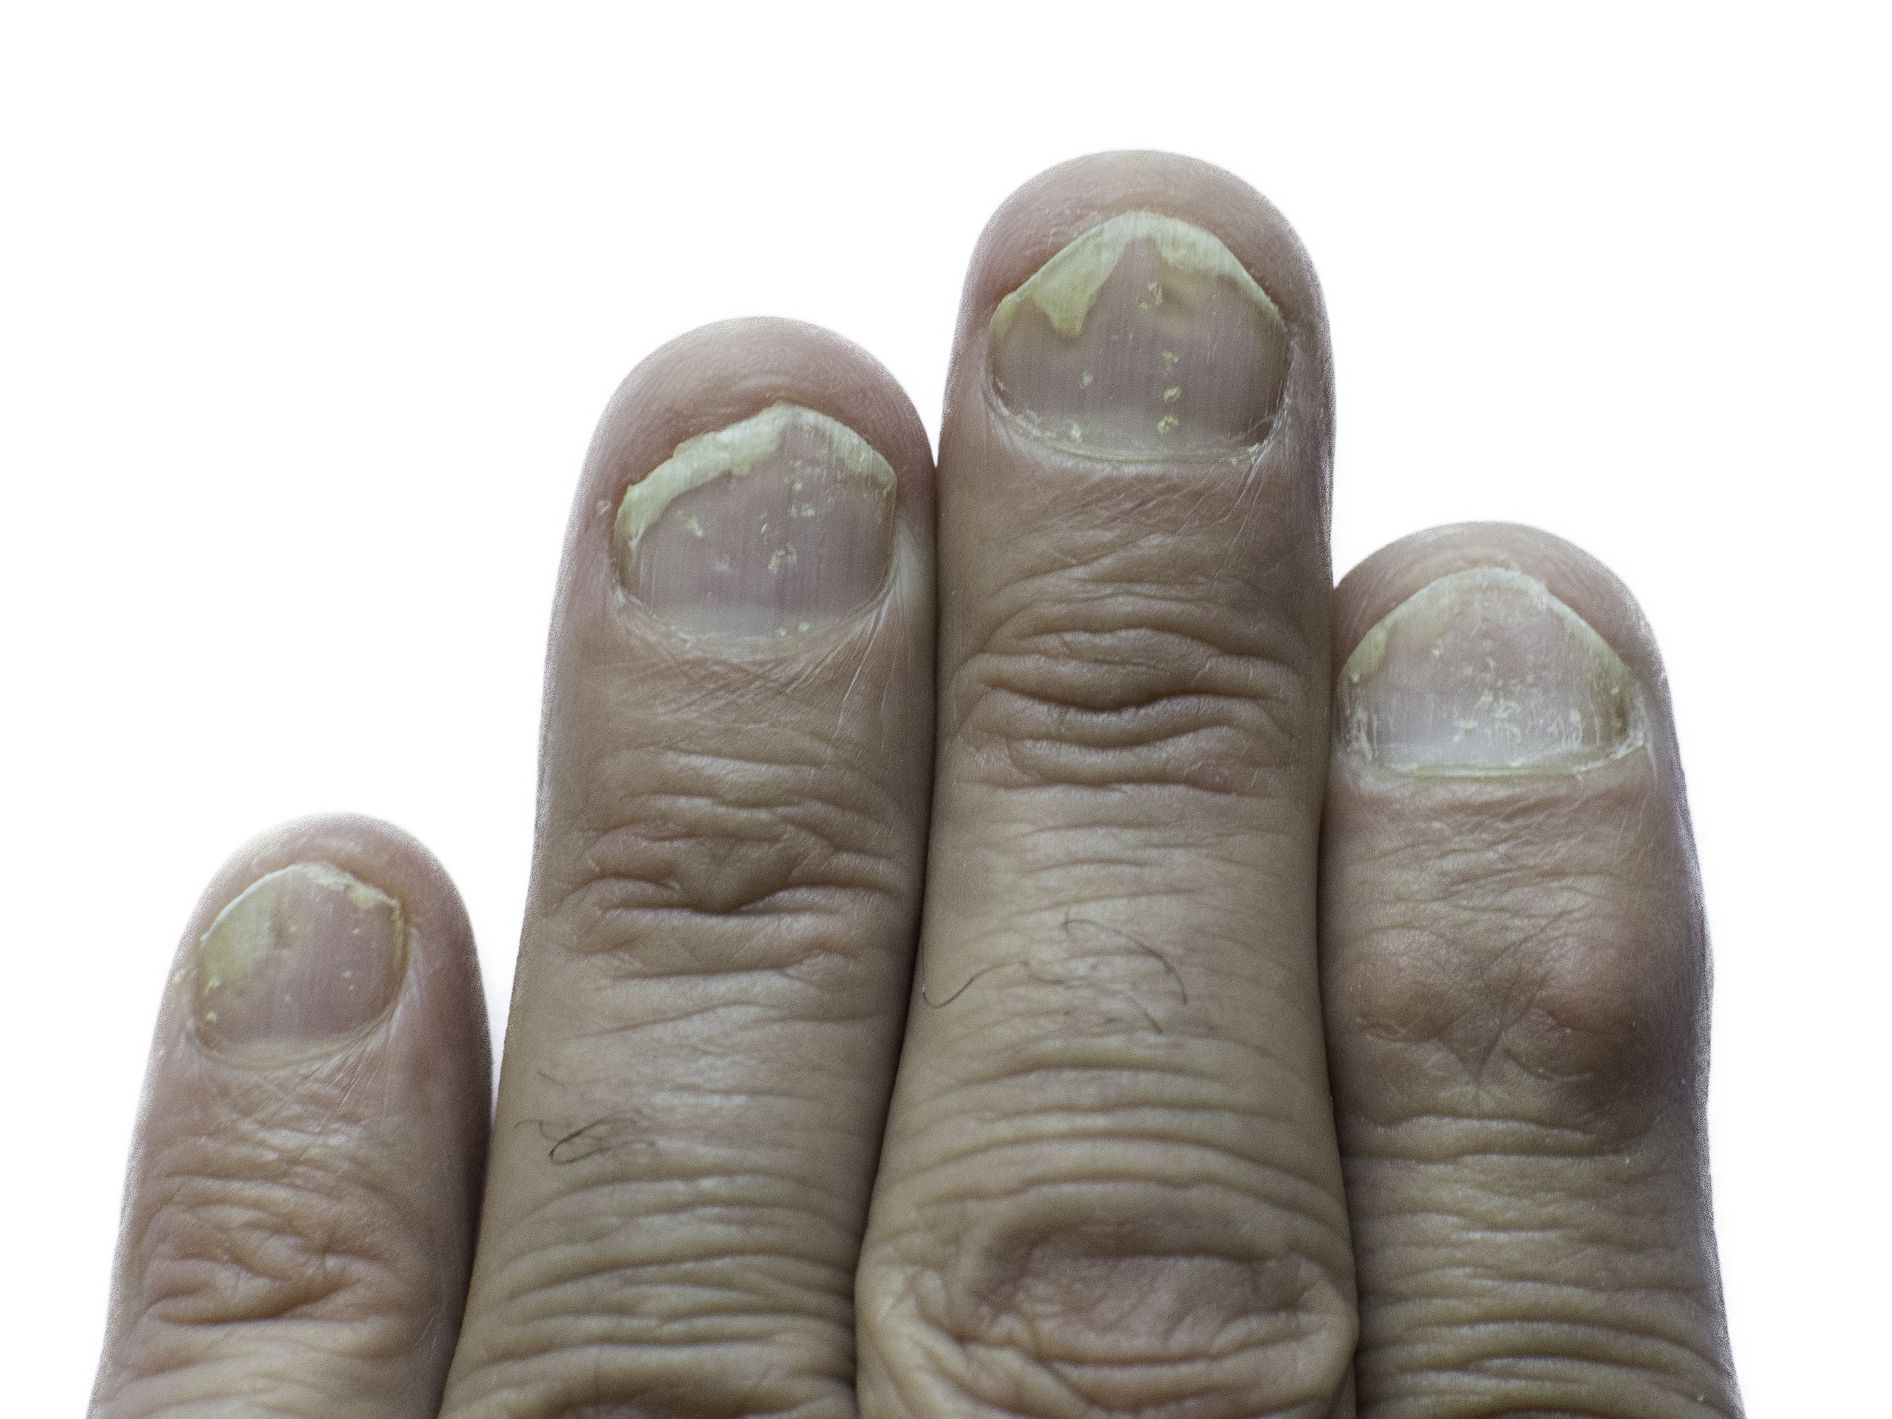 Treatment of nail psoriasis with herbal medicine